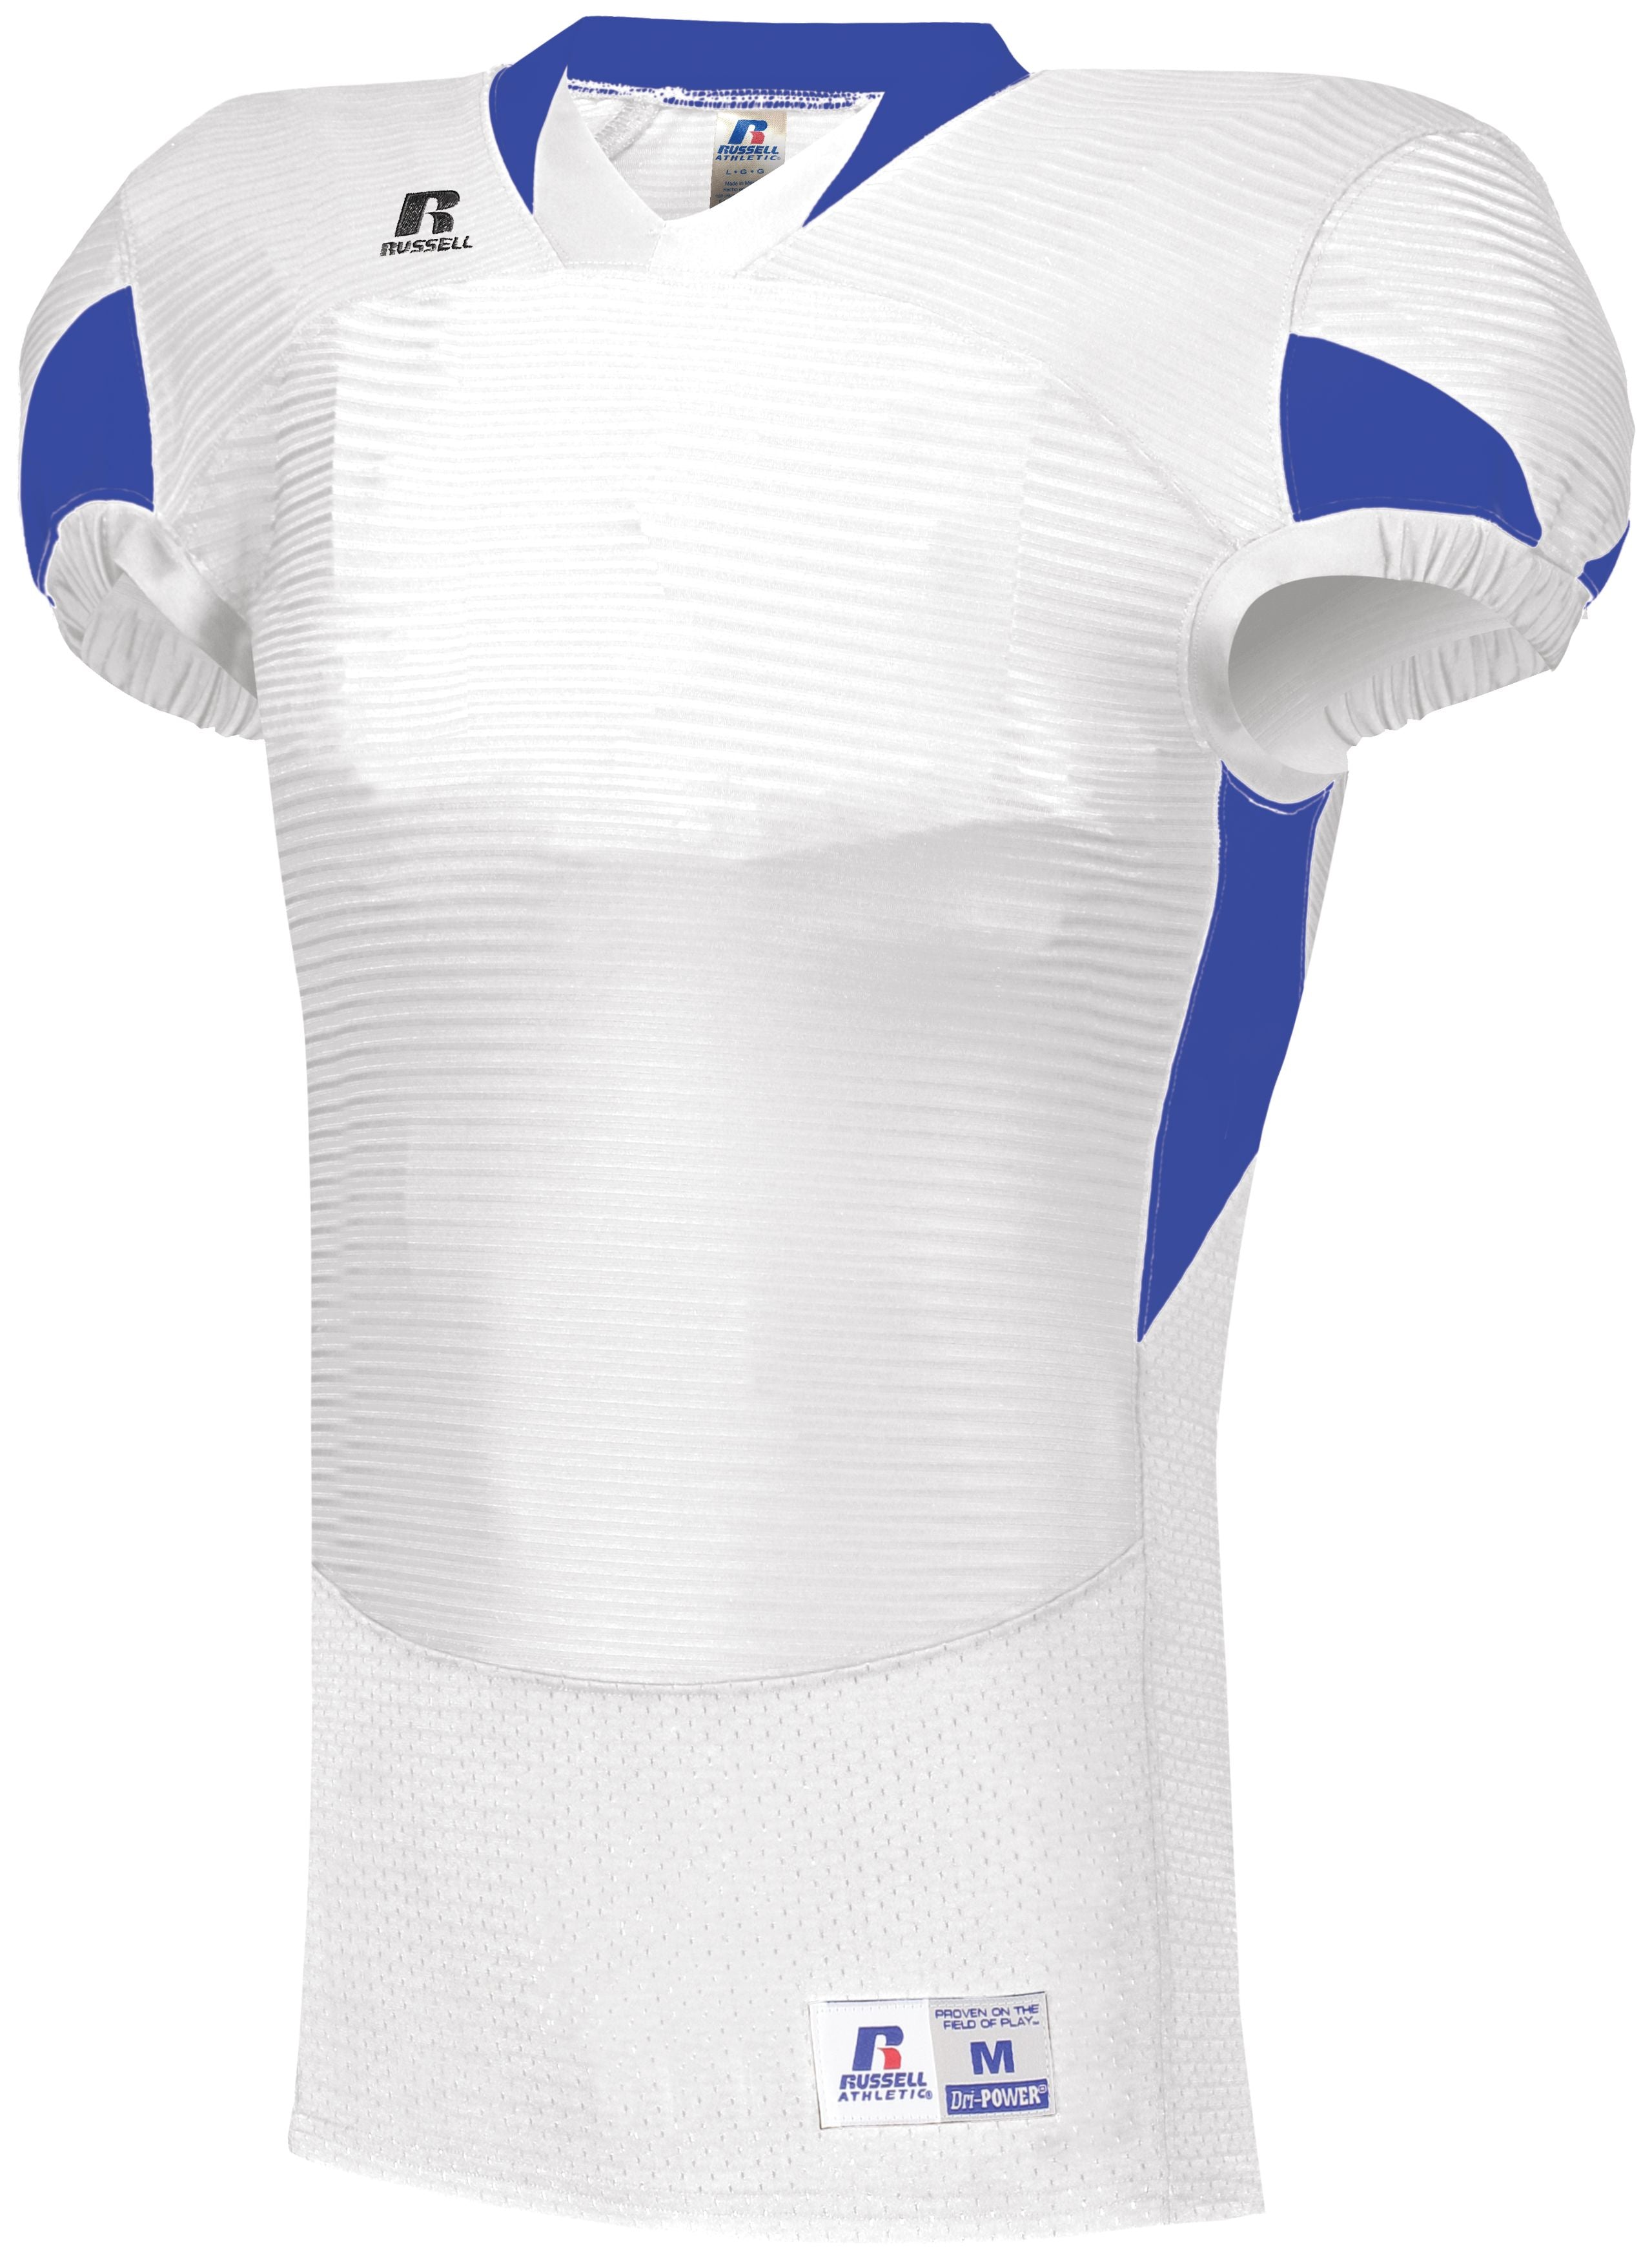 Russell Athletic Waist Length Football Jersey in White/Royal  -Part of the Adult, Adult-Jersey, Football, Russell-Athletic-Products, Shirts, All-Sports, All-Sports-1 product lines at KanaleyCreations.com